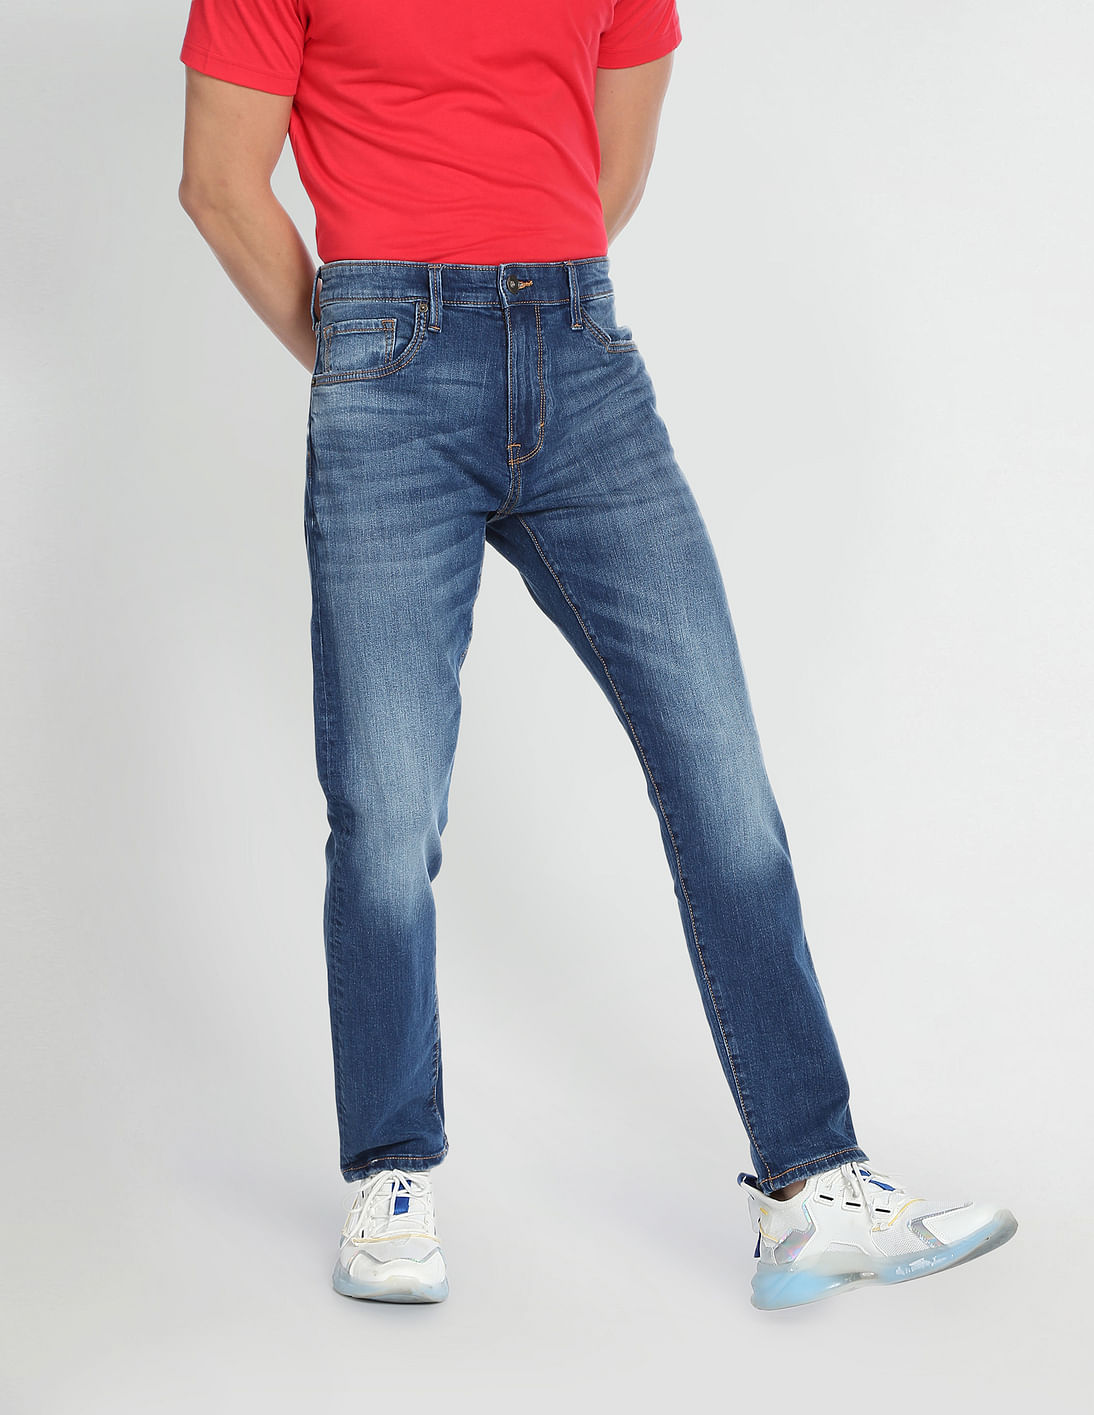 Buy Flying Machine Slash Slim Tapered Fit Mid Rise Jeans - NNNOW.com